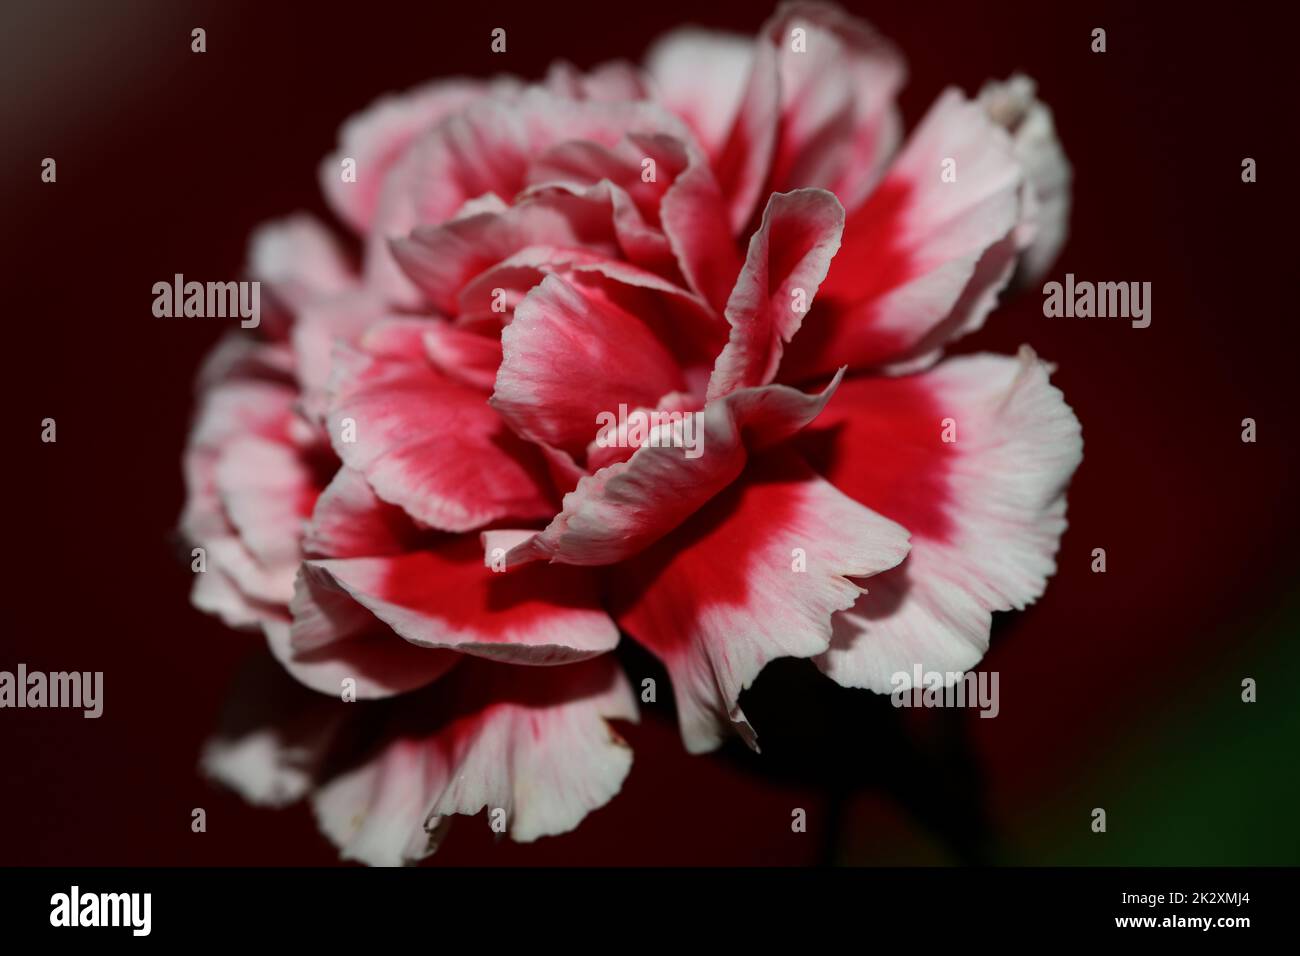 Red flower blossoms close up dianthus caryophyllus family caryophyllaceae botanical background modern high quality big size print Stock Photo